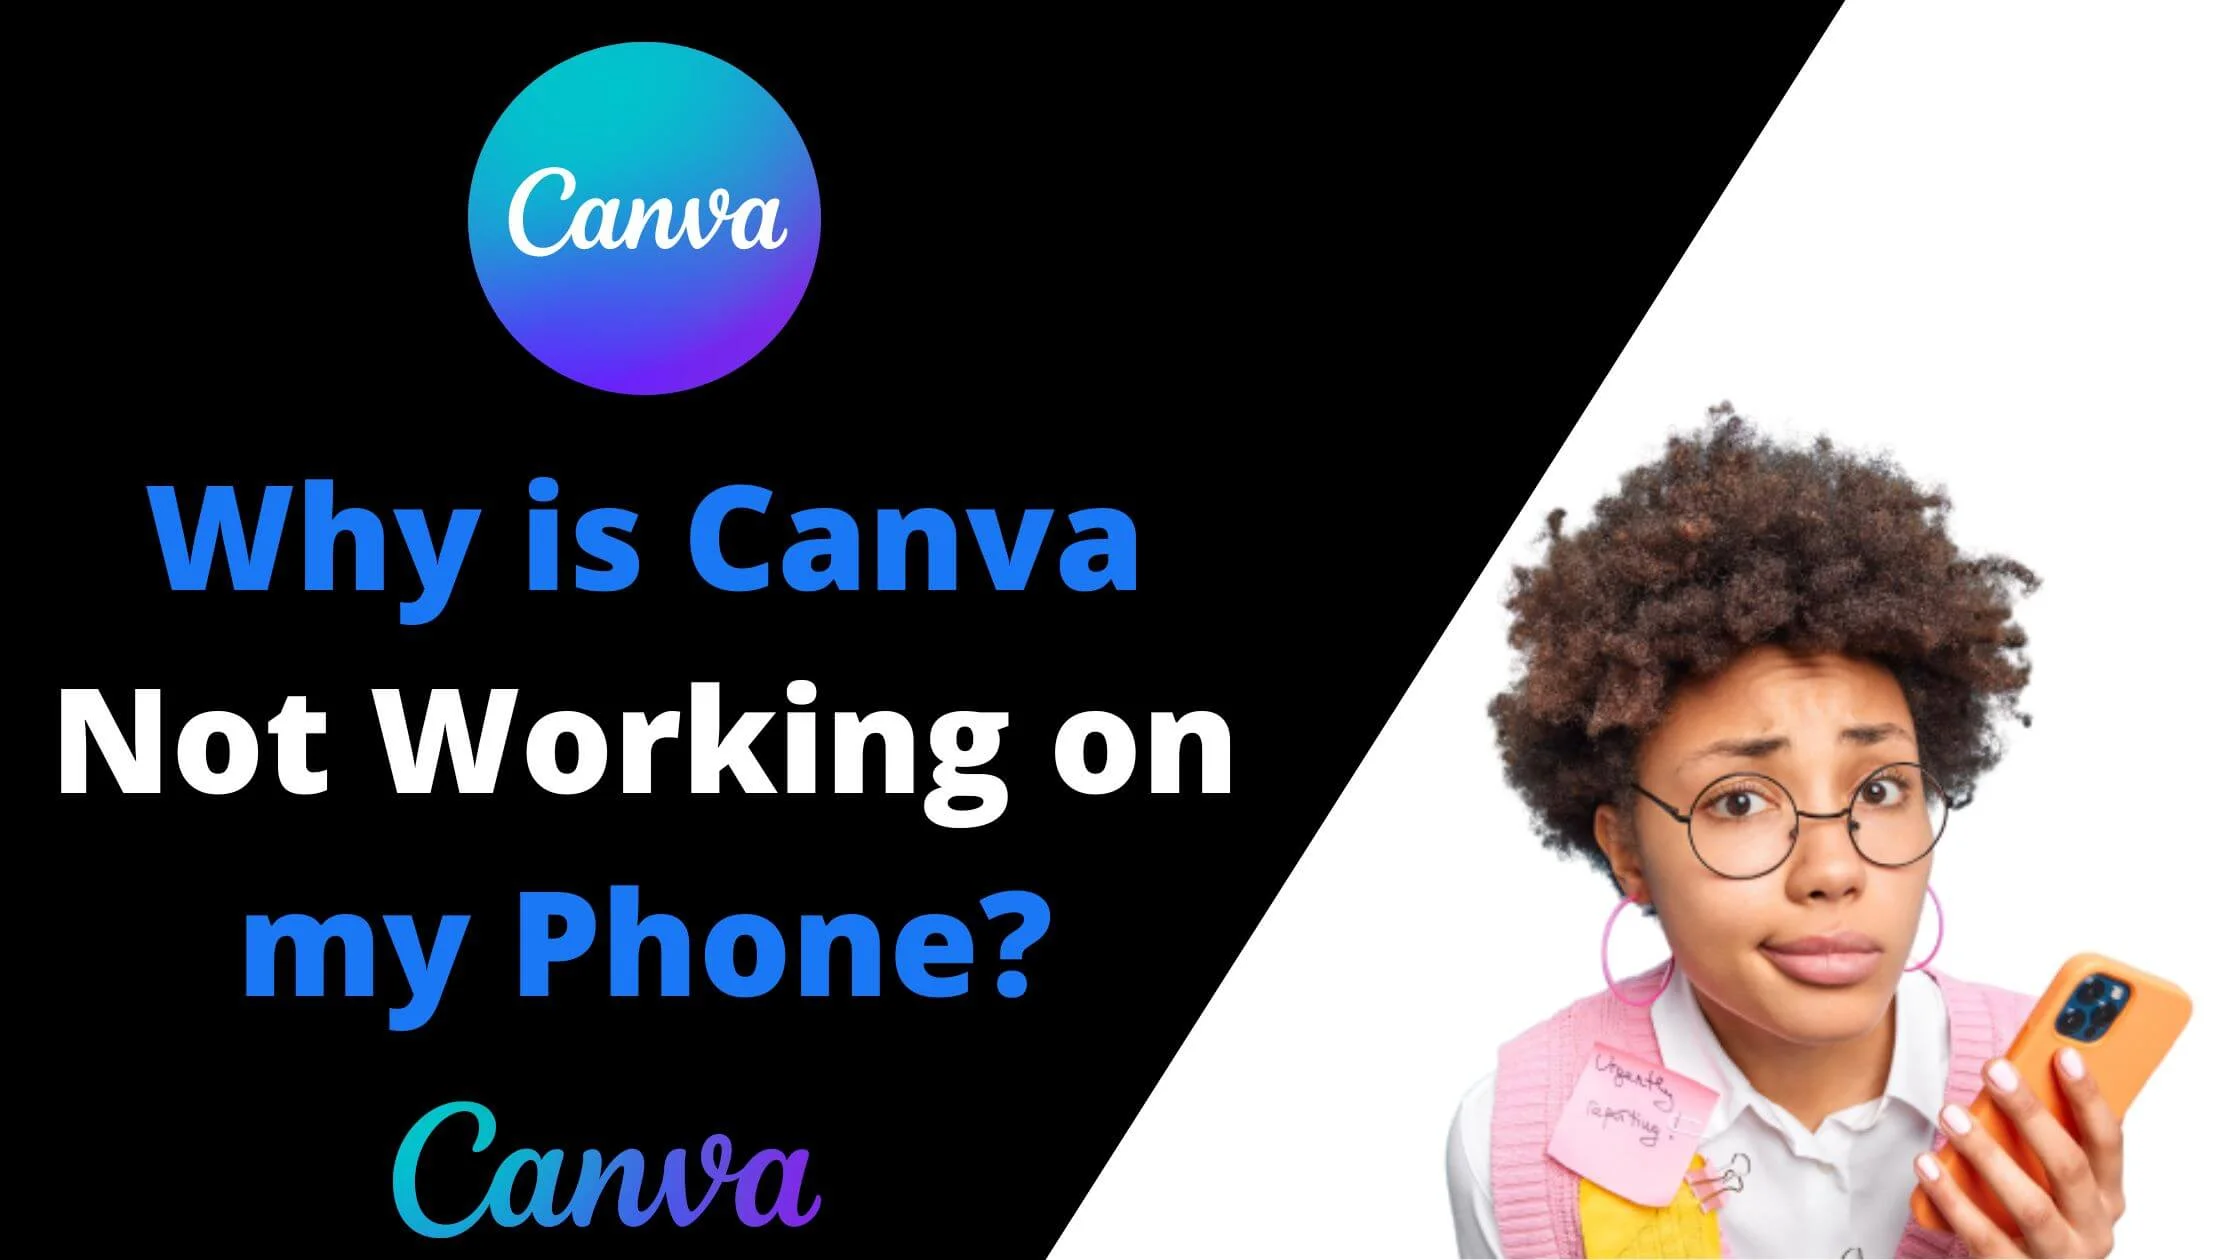 Why is Canva Not Working on my Phone